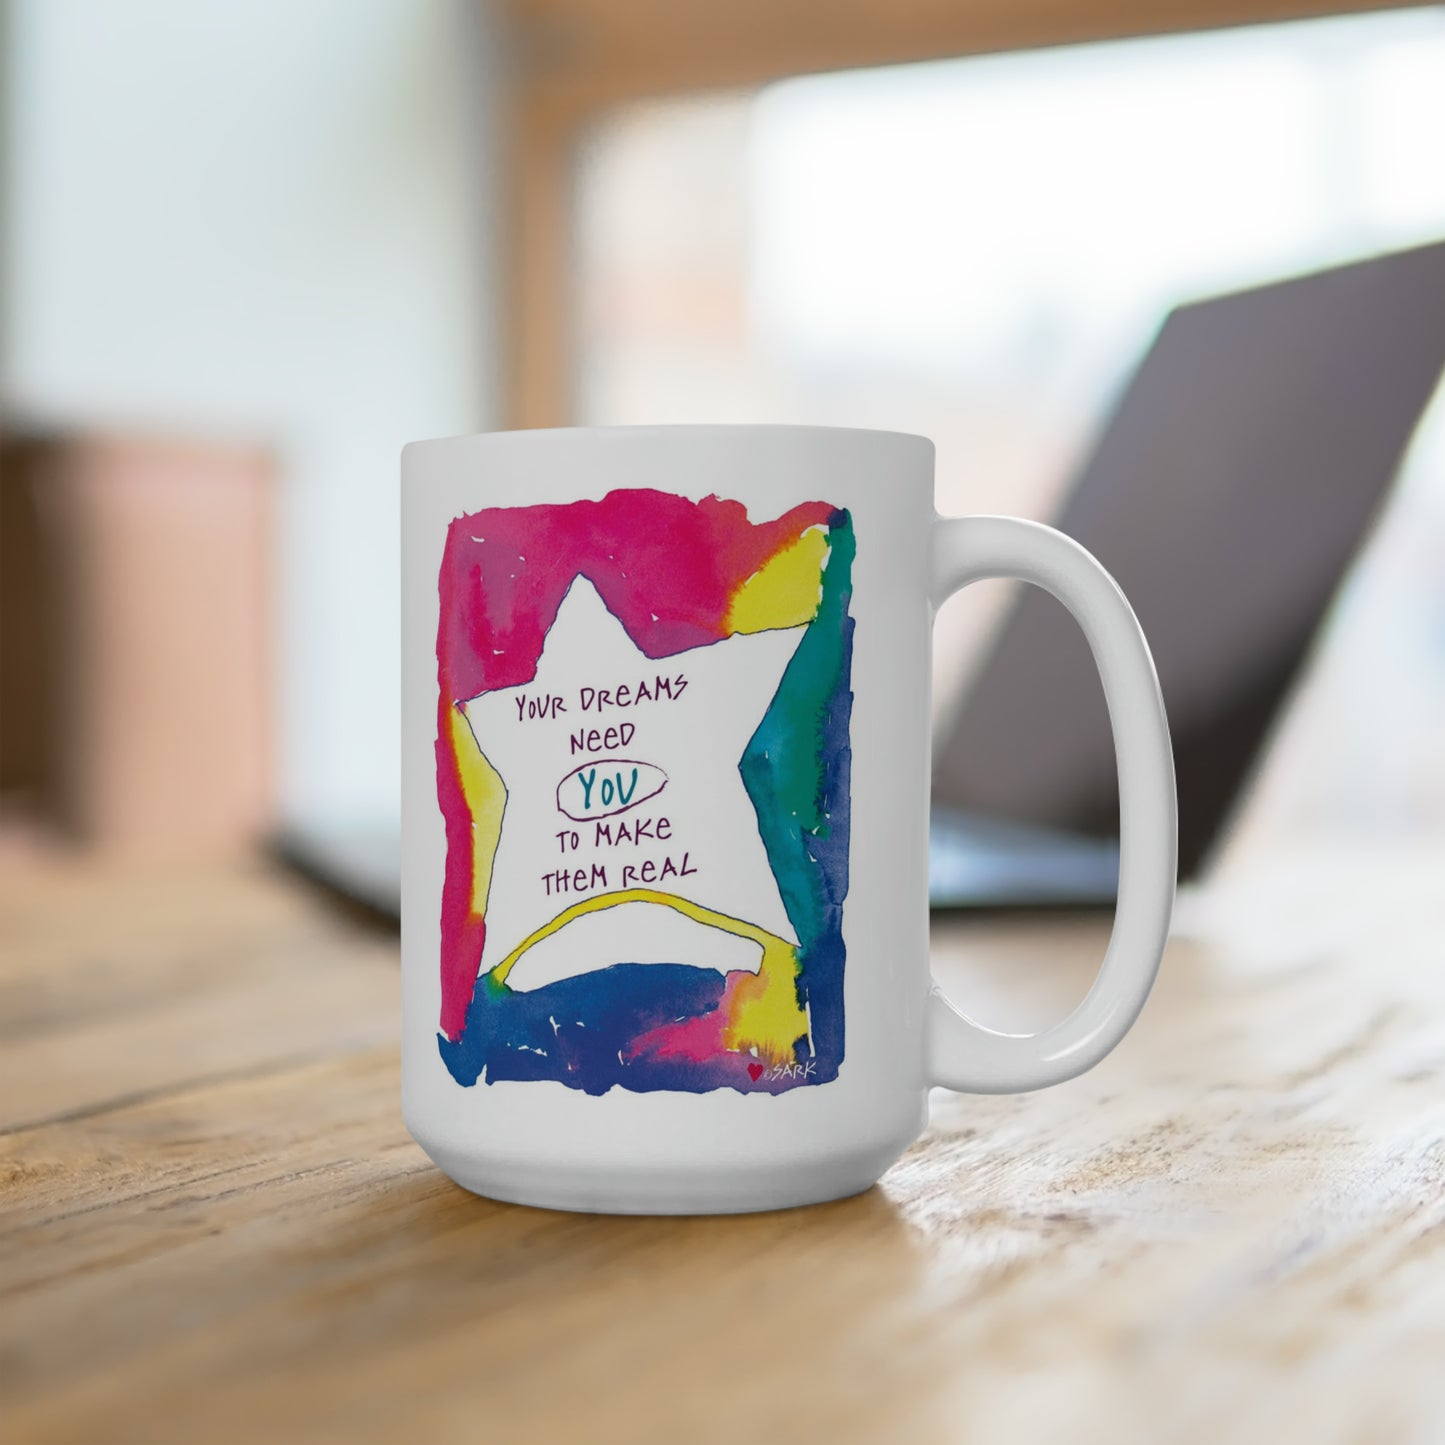 Your Dreams Need YOU To Make Them REAL by SARK - White Ceramic Mug